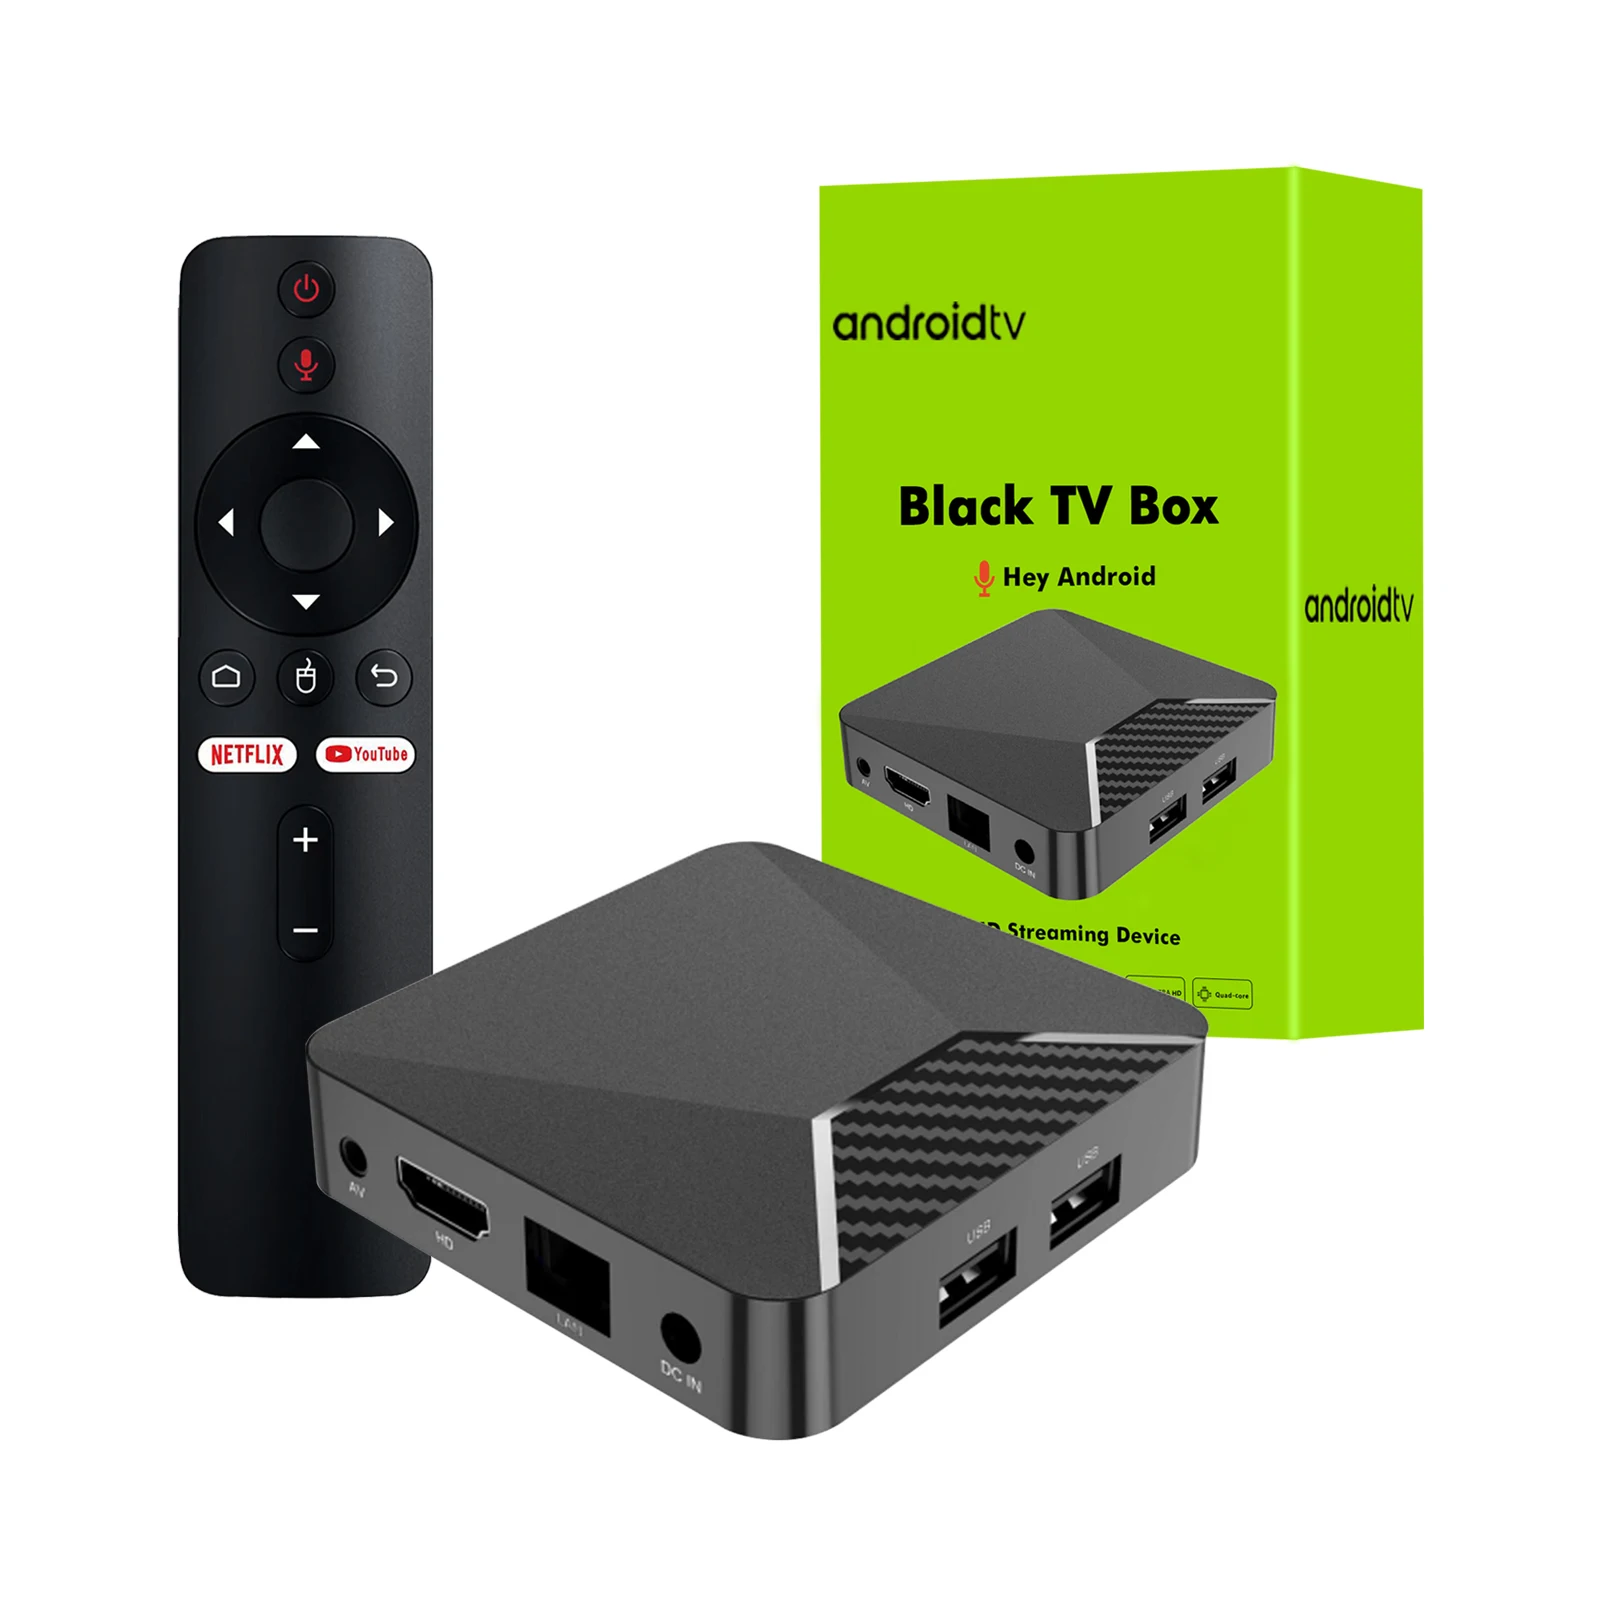 Game TV Box M8 Pro Mini Android and Game Dual System with 10000+ Retor Game  Wireless Controllers 100M 4K TV Box 